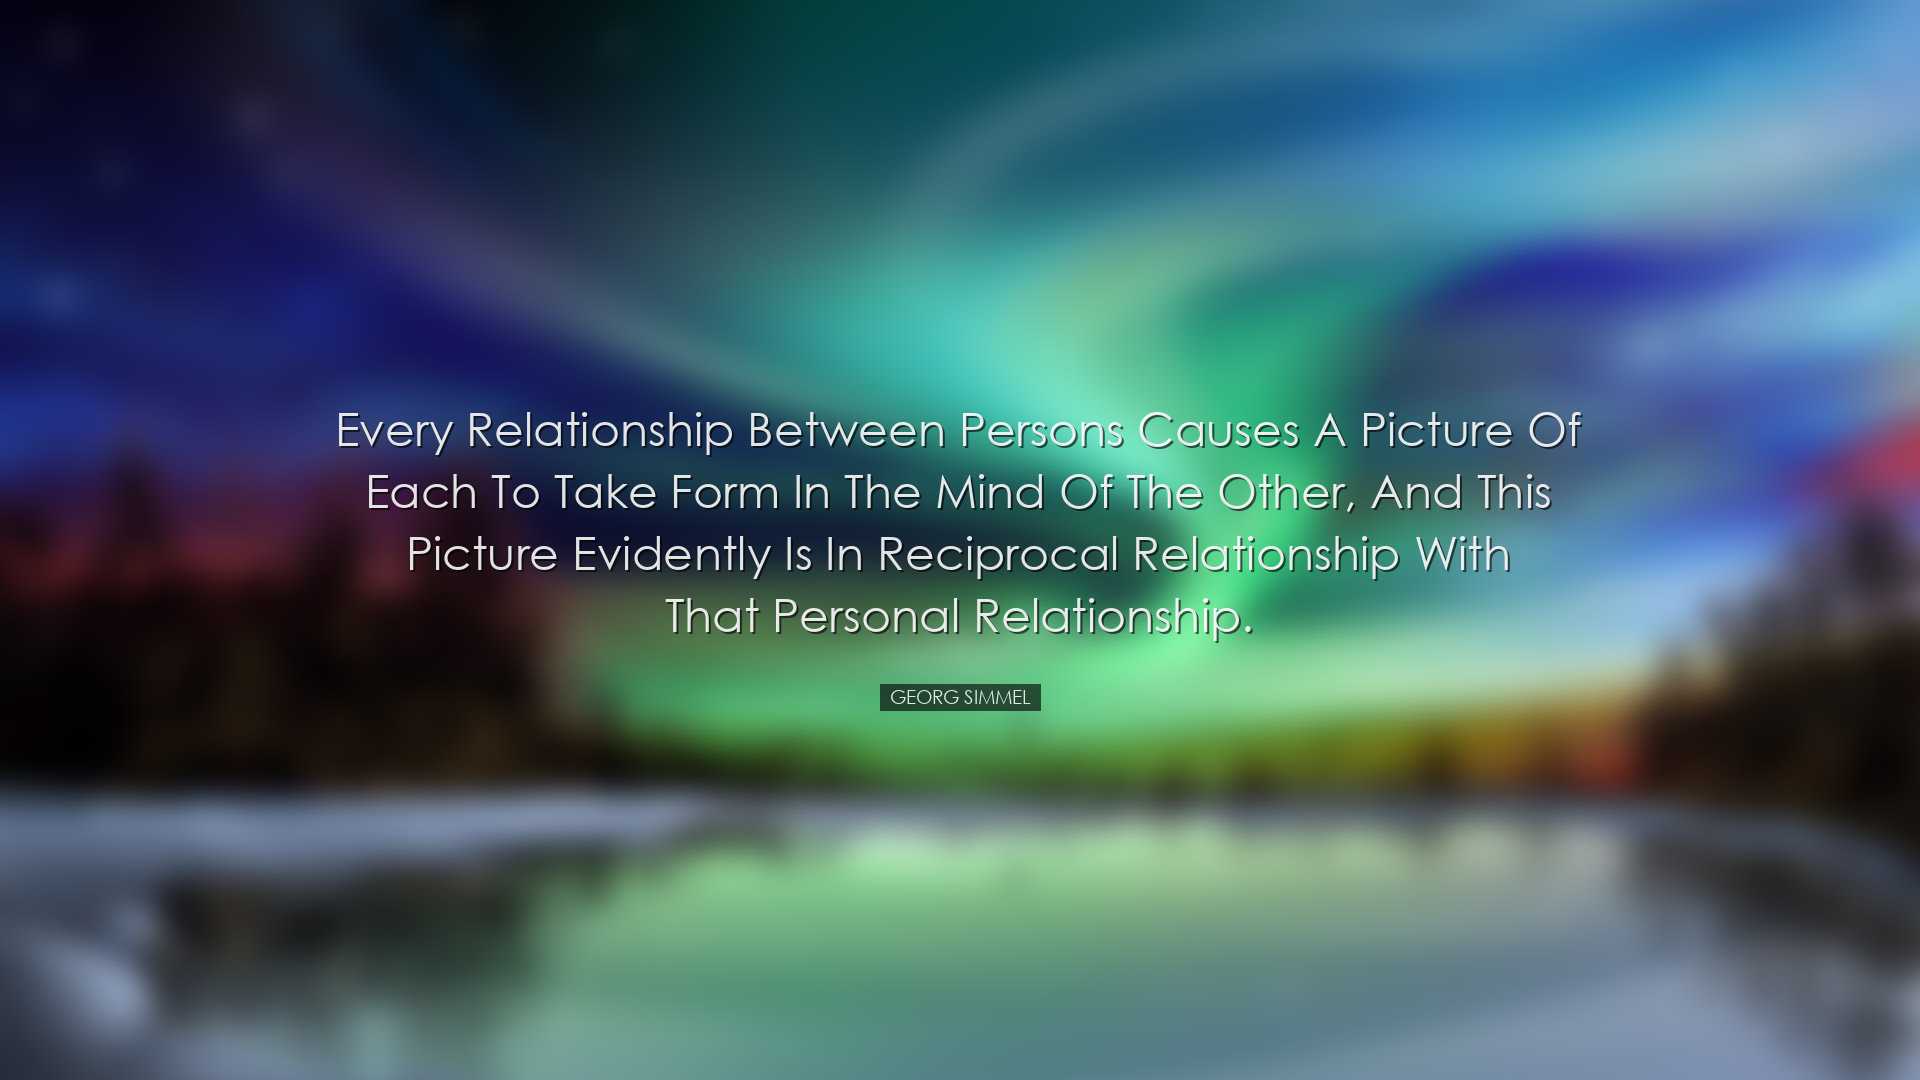 Every relationship between persons causes a picture of each to tak